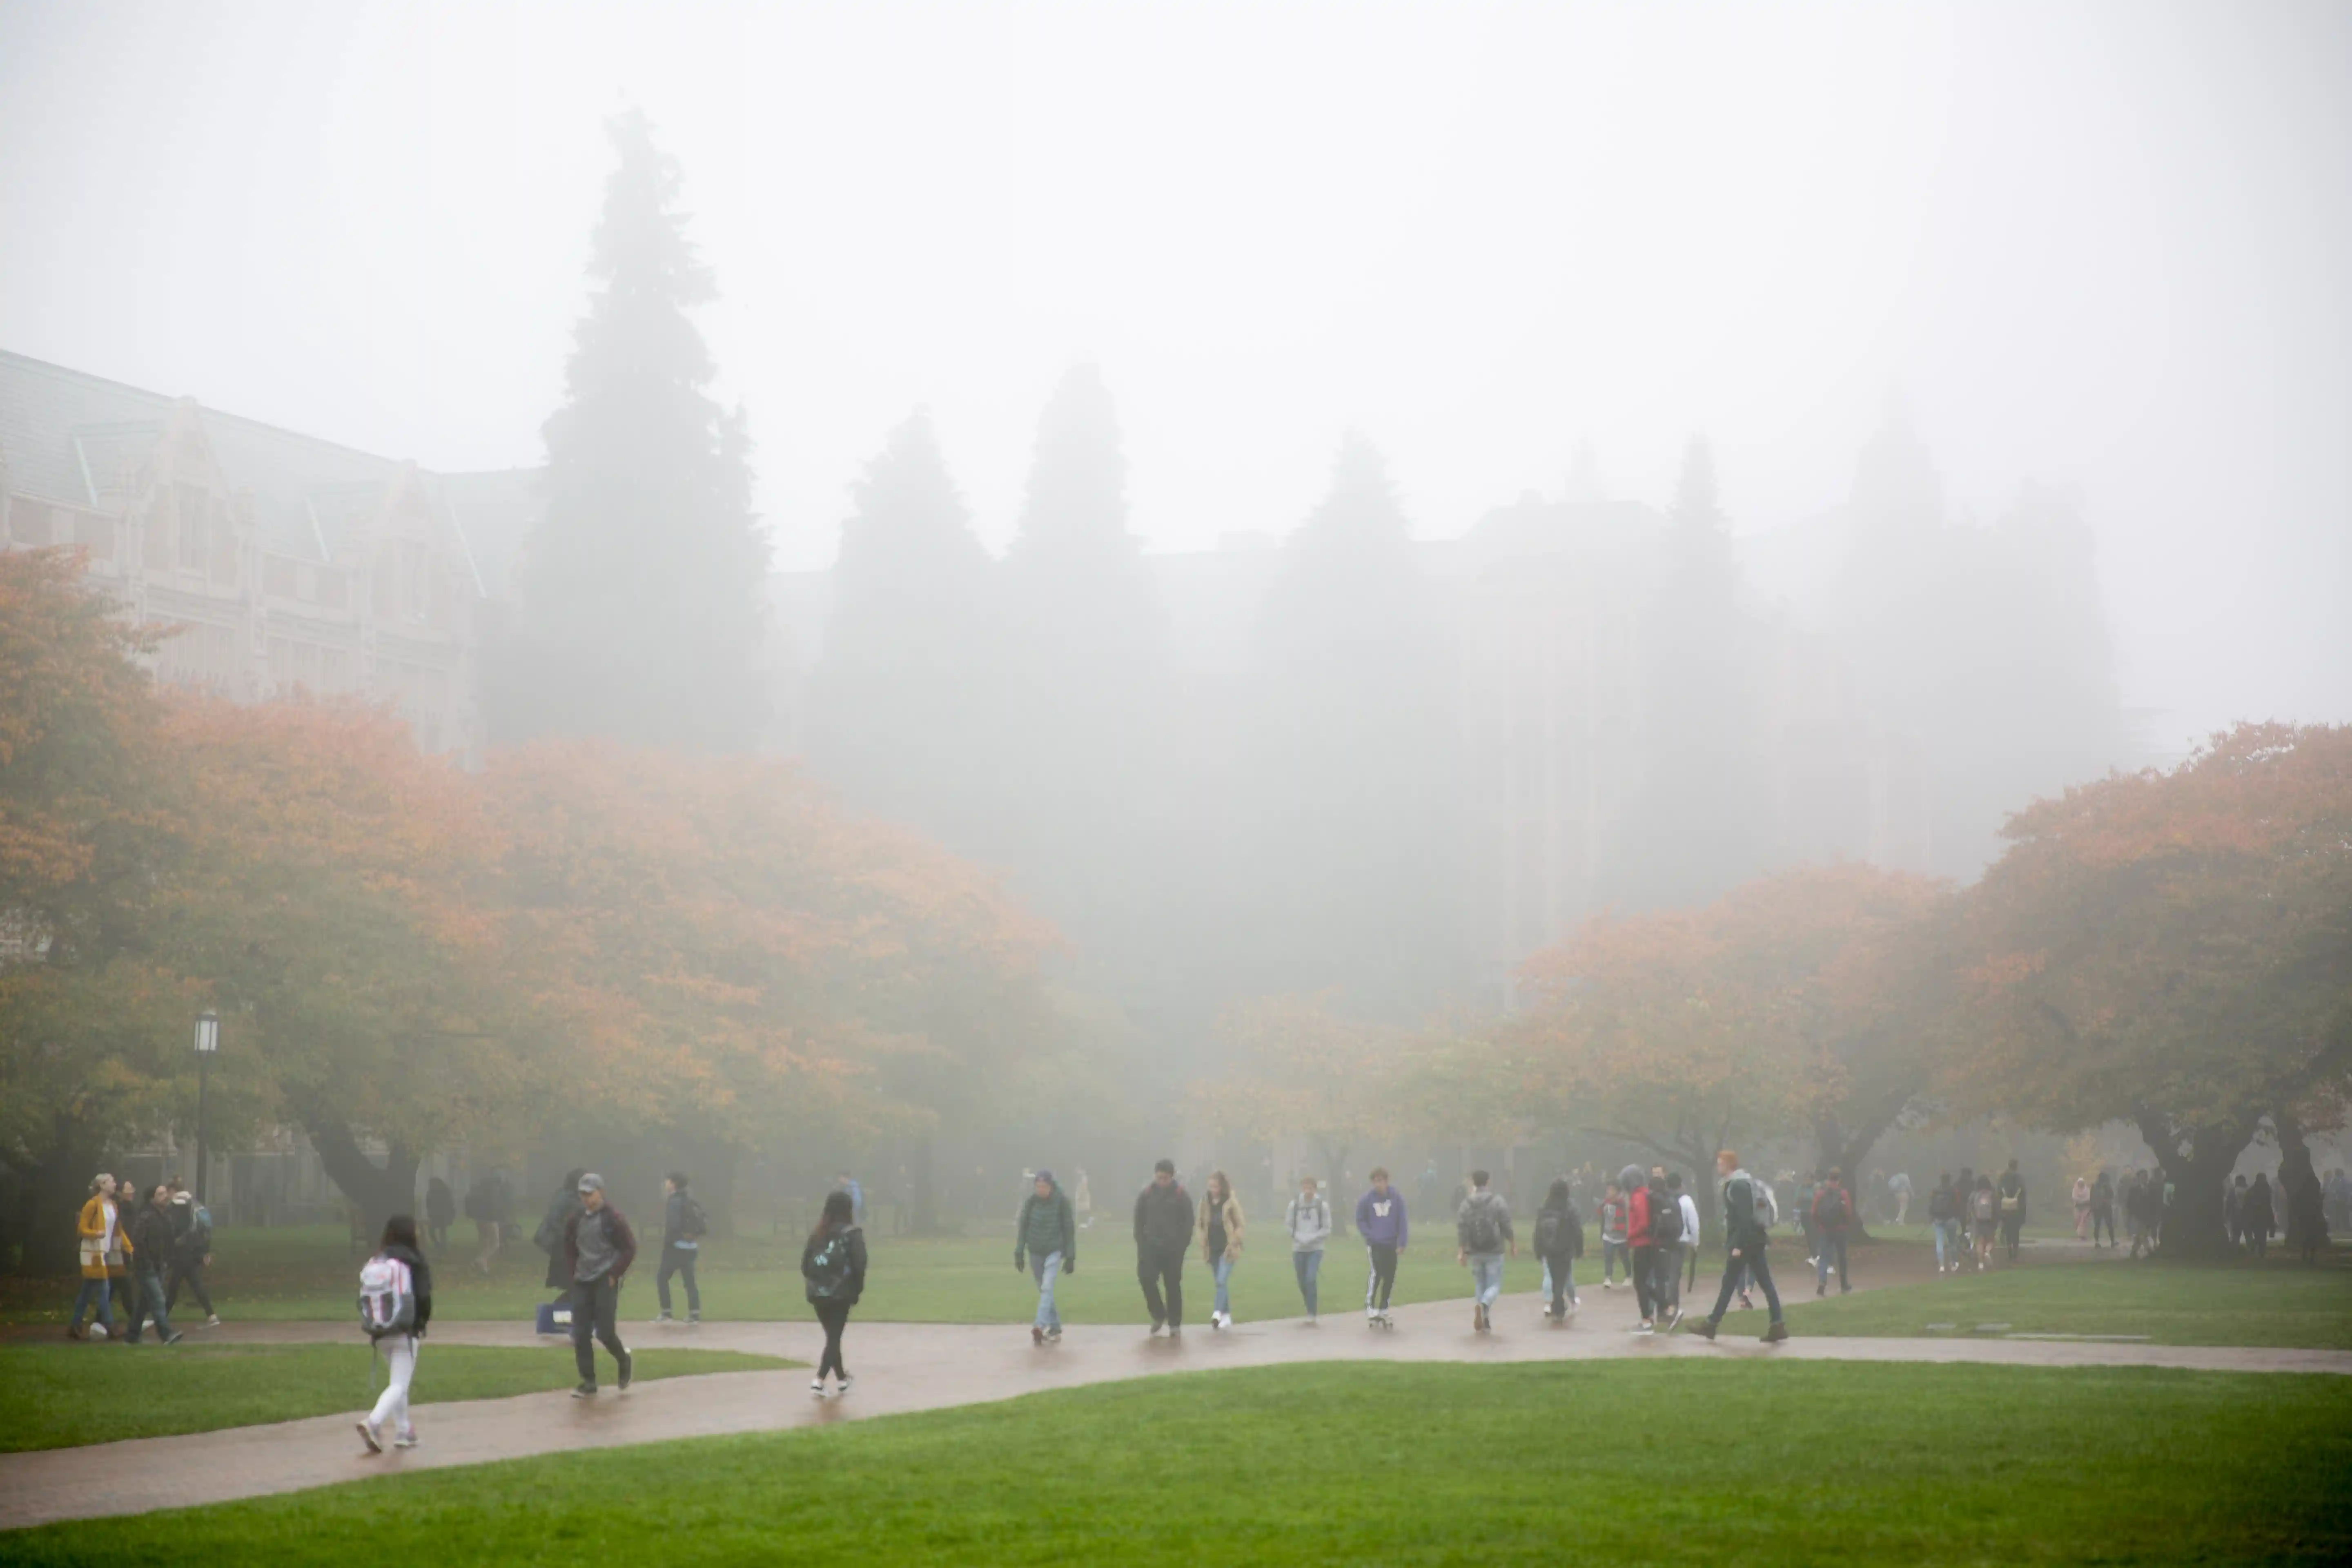 Students walking through the quad in a haze of mist and drizzle